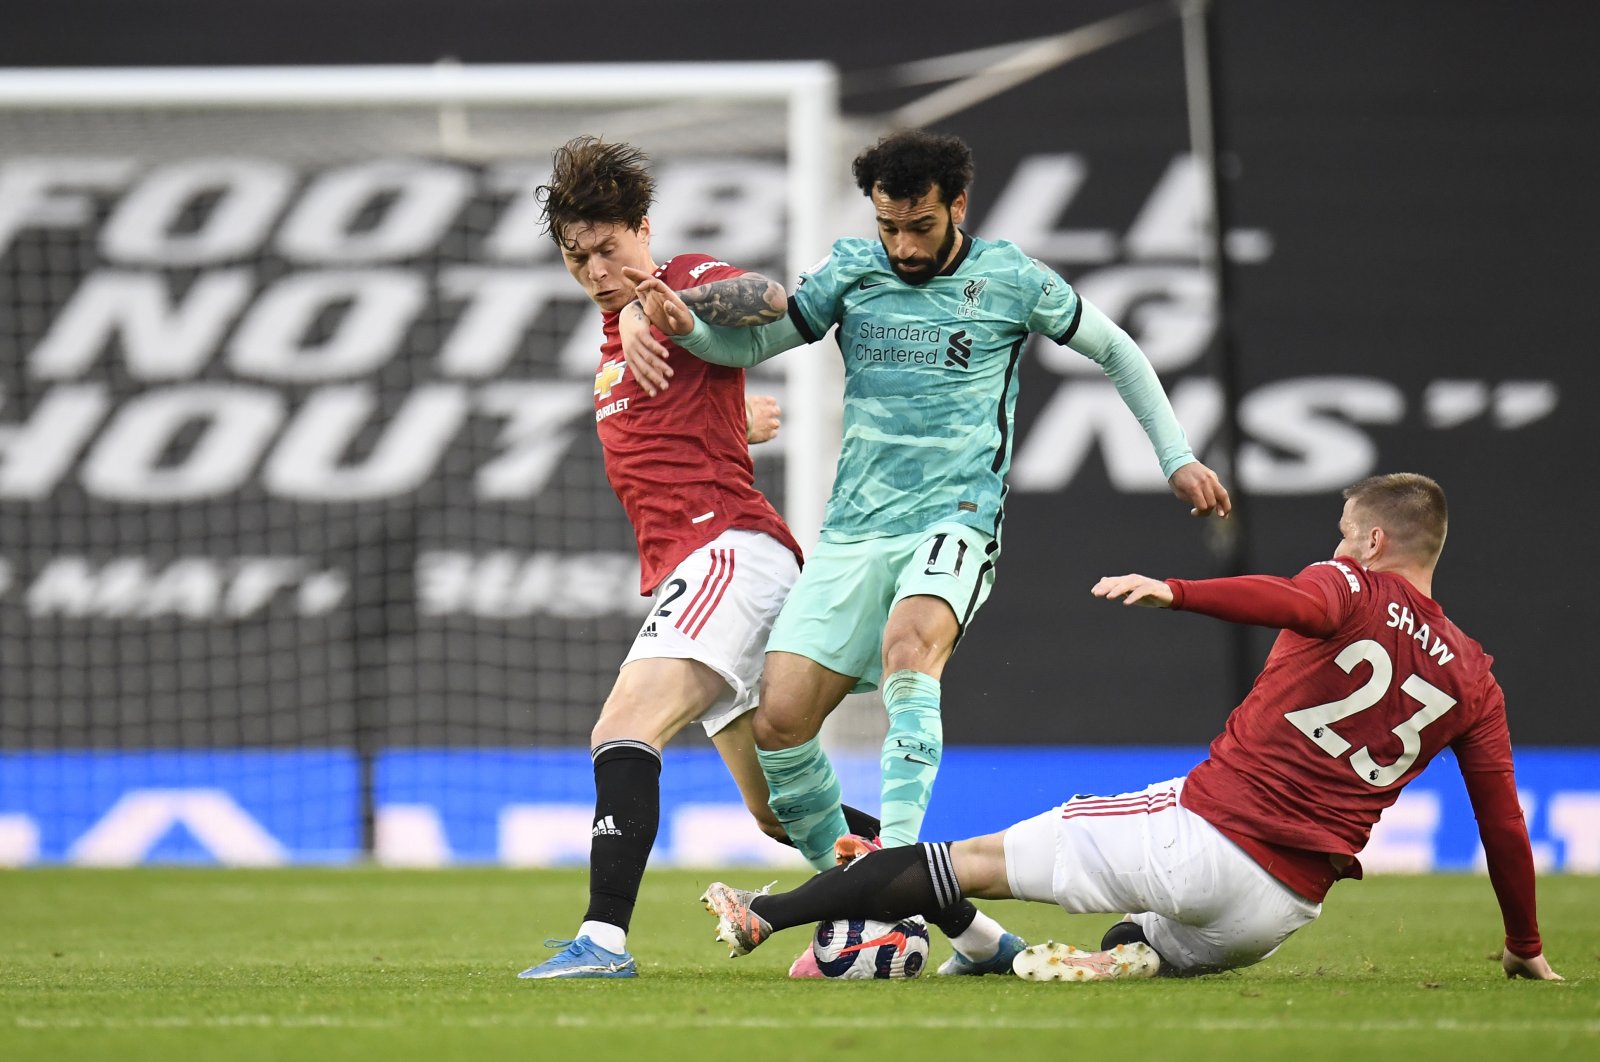 Liverpool's Mohamed Salah (C) duels for the ball with Manchester United's Luke Shaw (R) during a Premier League match at the Old Trafford stadium in Manchester, England, May 13, 2021. (AP Photo)